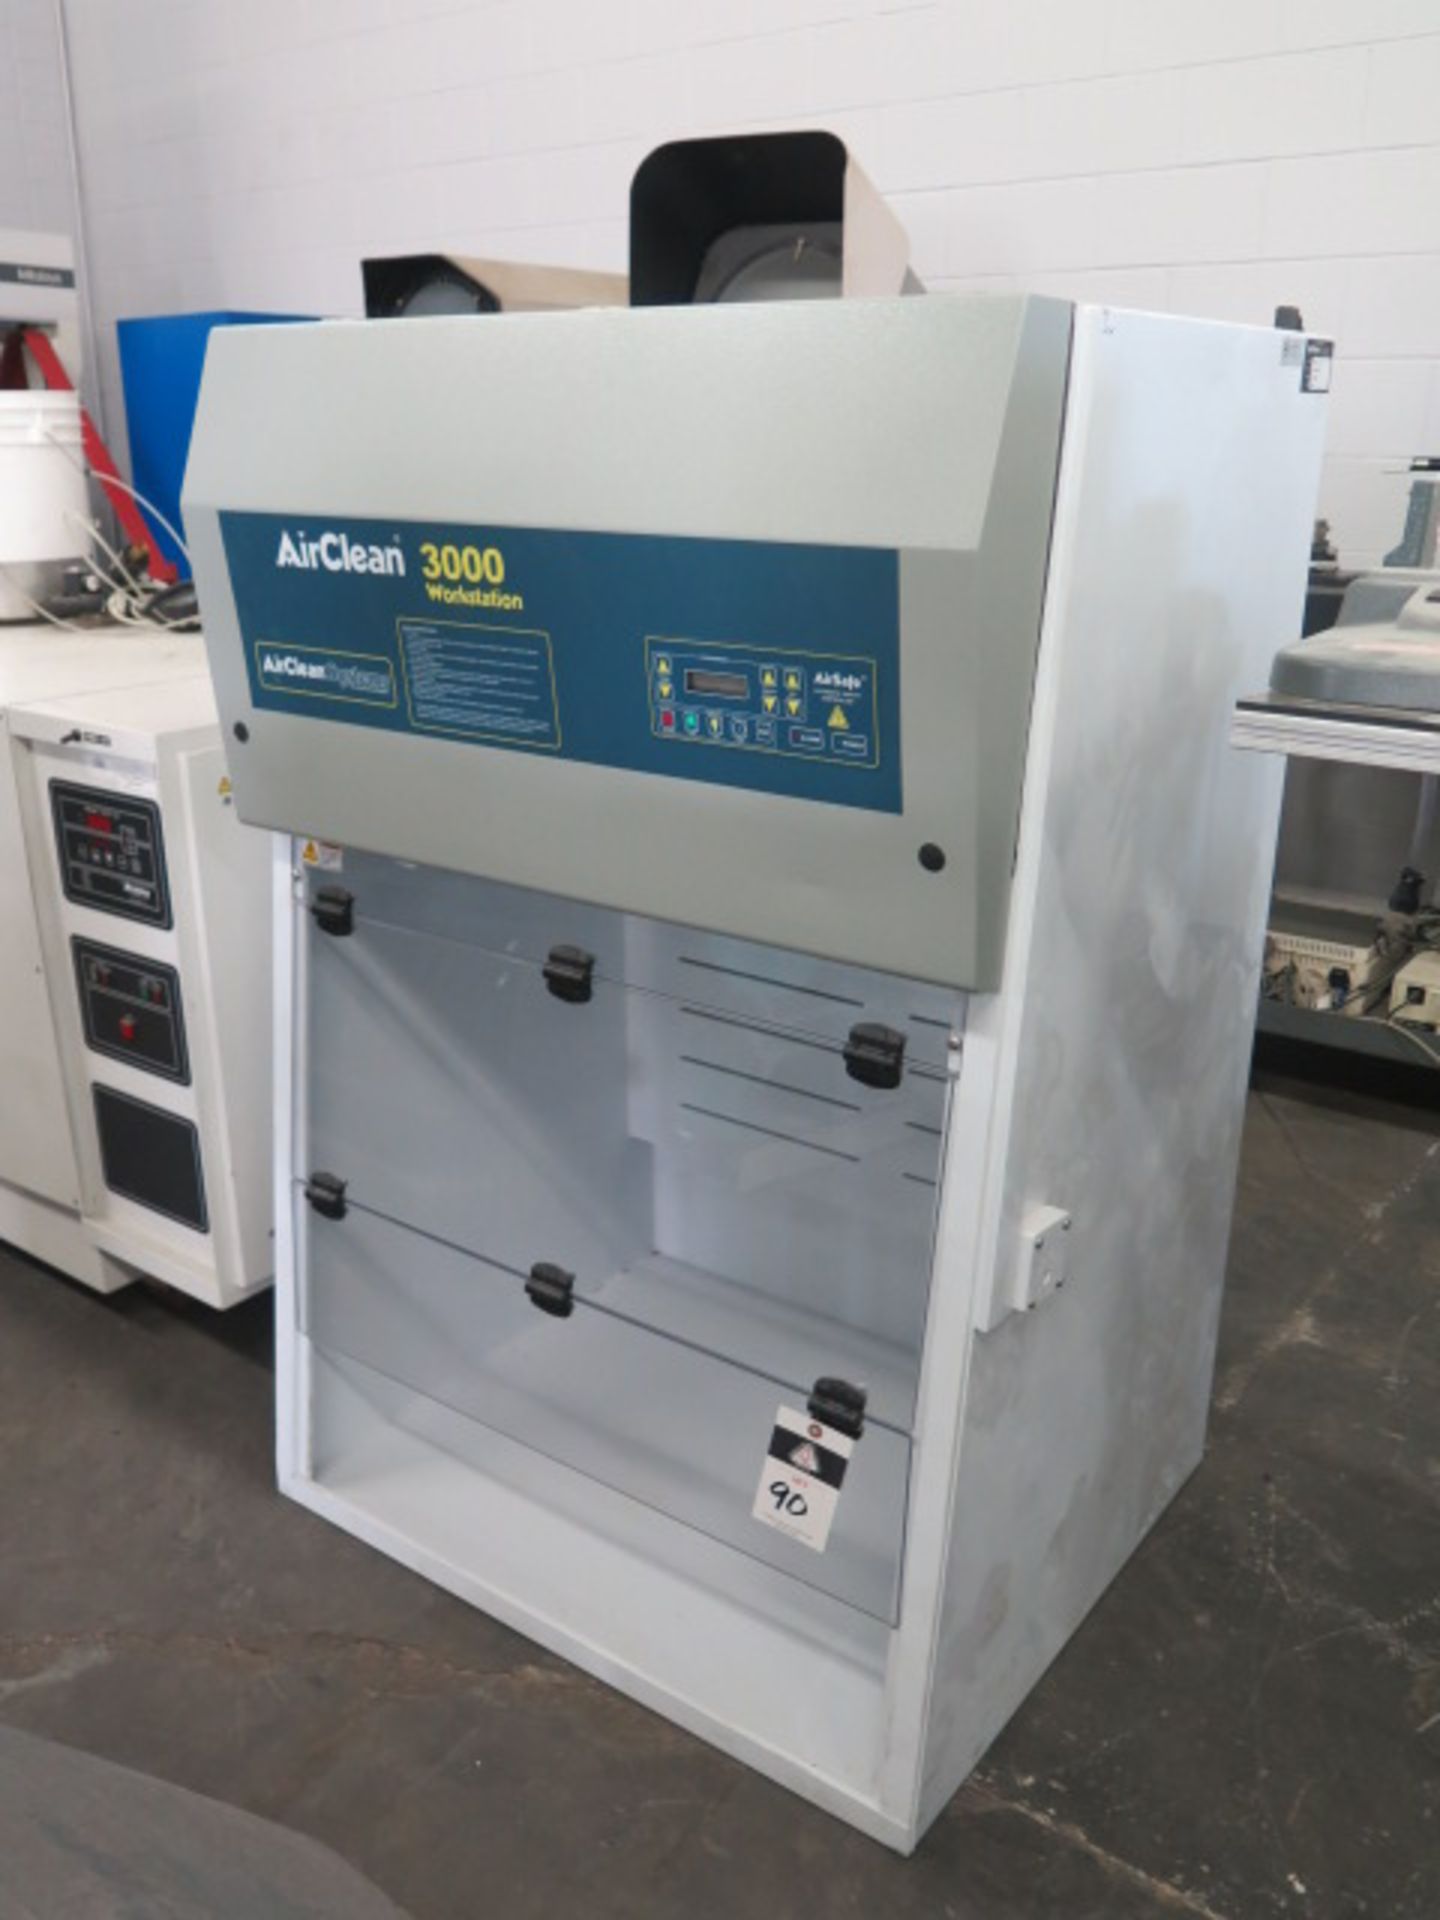 Air Clean Systems “AirClean 3000” Bench Model Flow Hood s/n AC3000-558 w/ Airsafe Digital Controls - Image 2 of 7